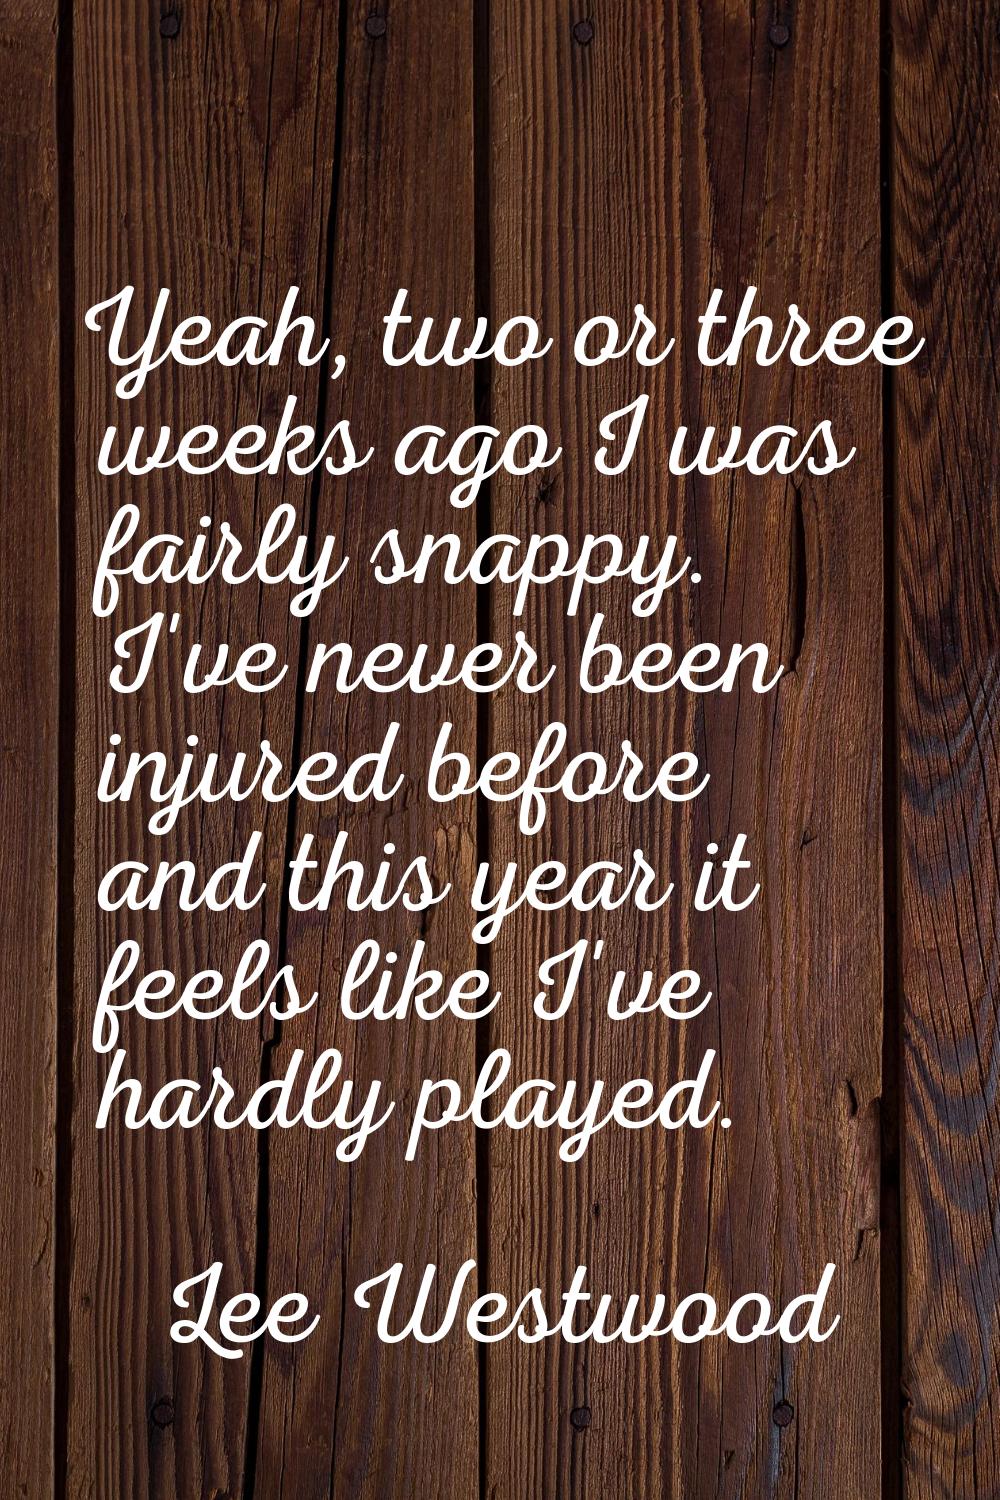 Yeah, two or three weeks ago I was fairly snappy. I've never been injured before and this year it f